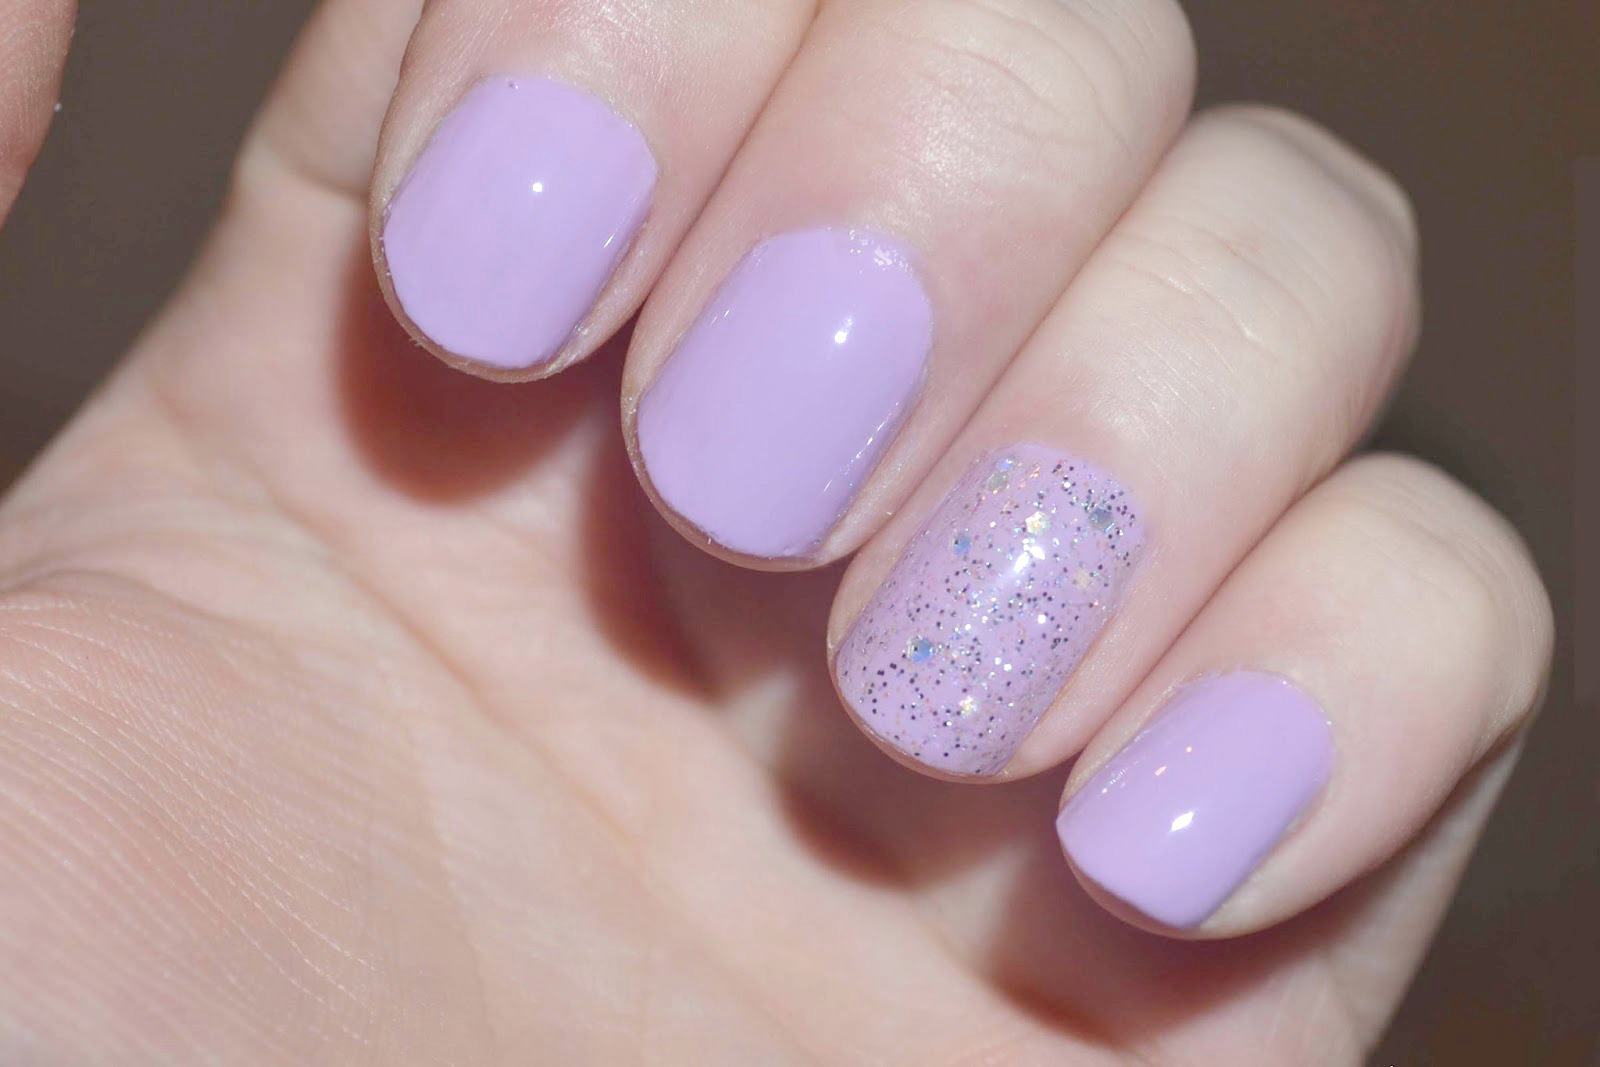 3. Miniluxe Nail Polish in "Lilac Love" - wide 6